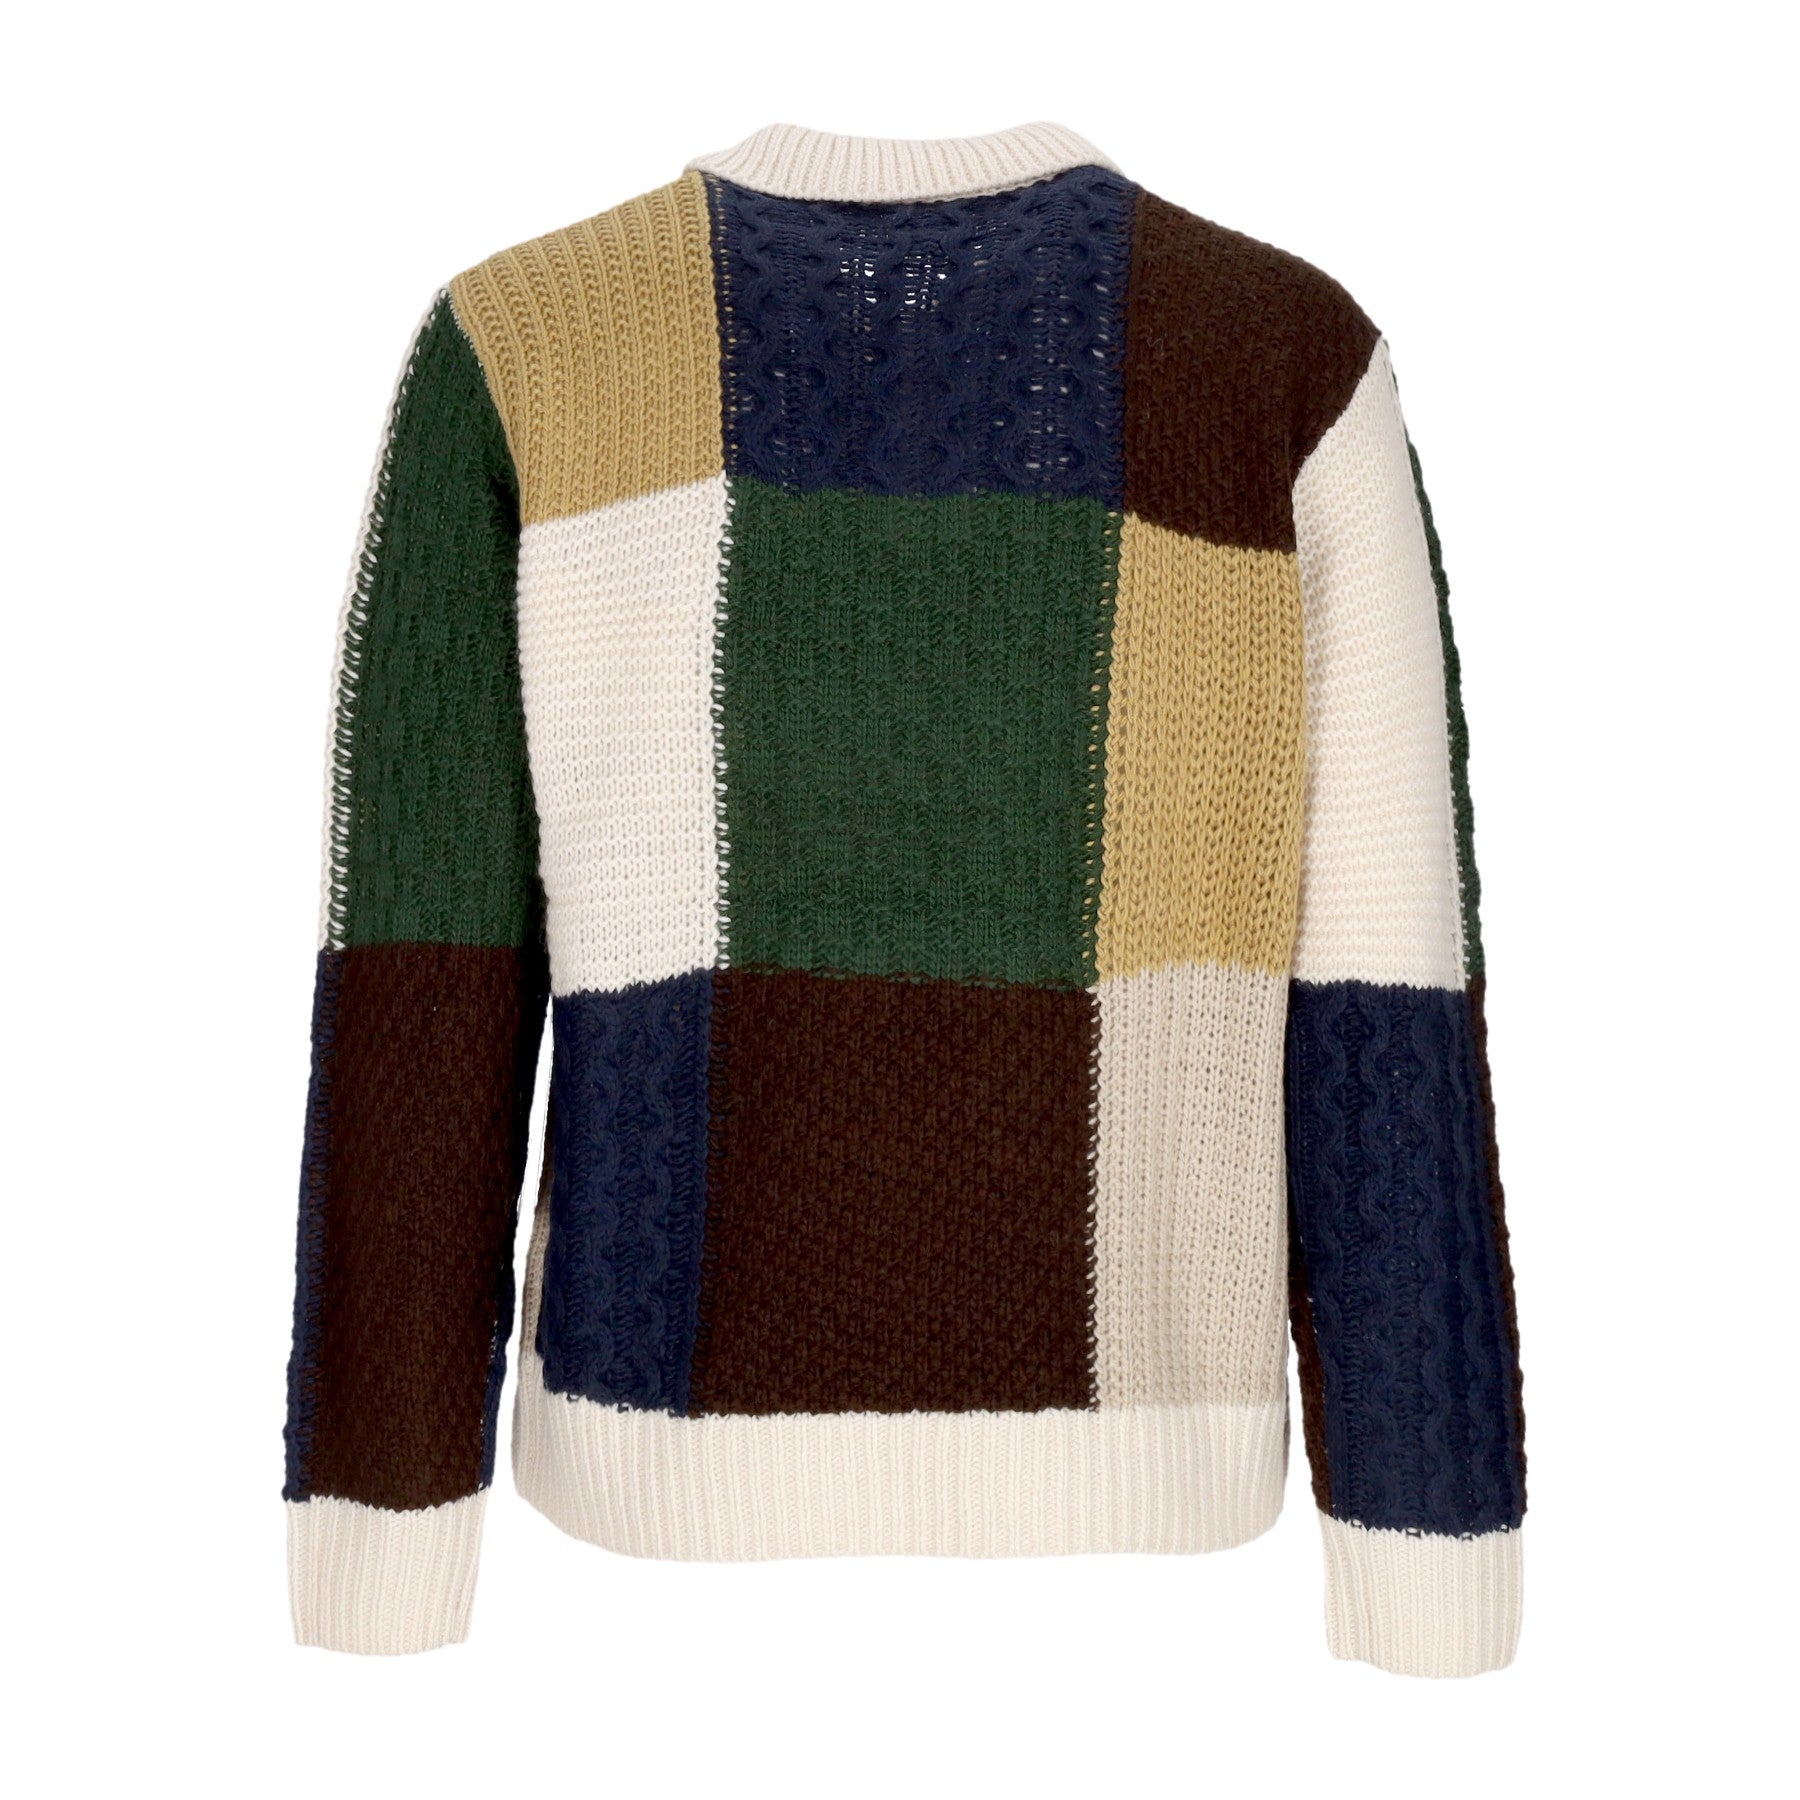 Obey, Maglione Uomo Oliver Patchwork Sweater, 